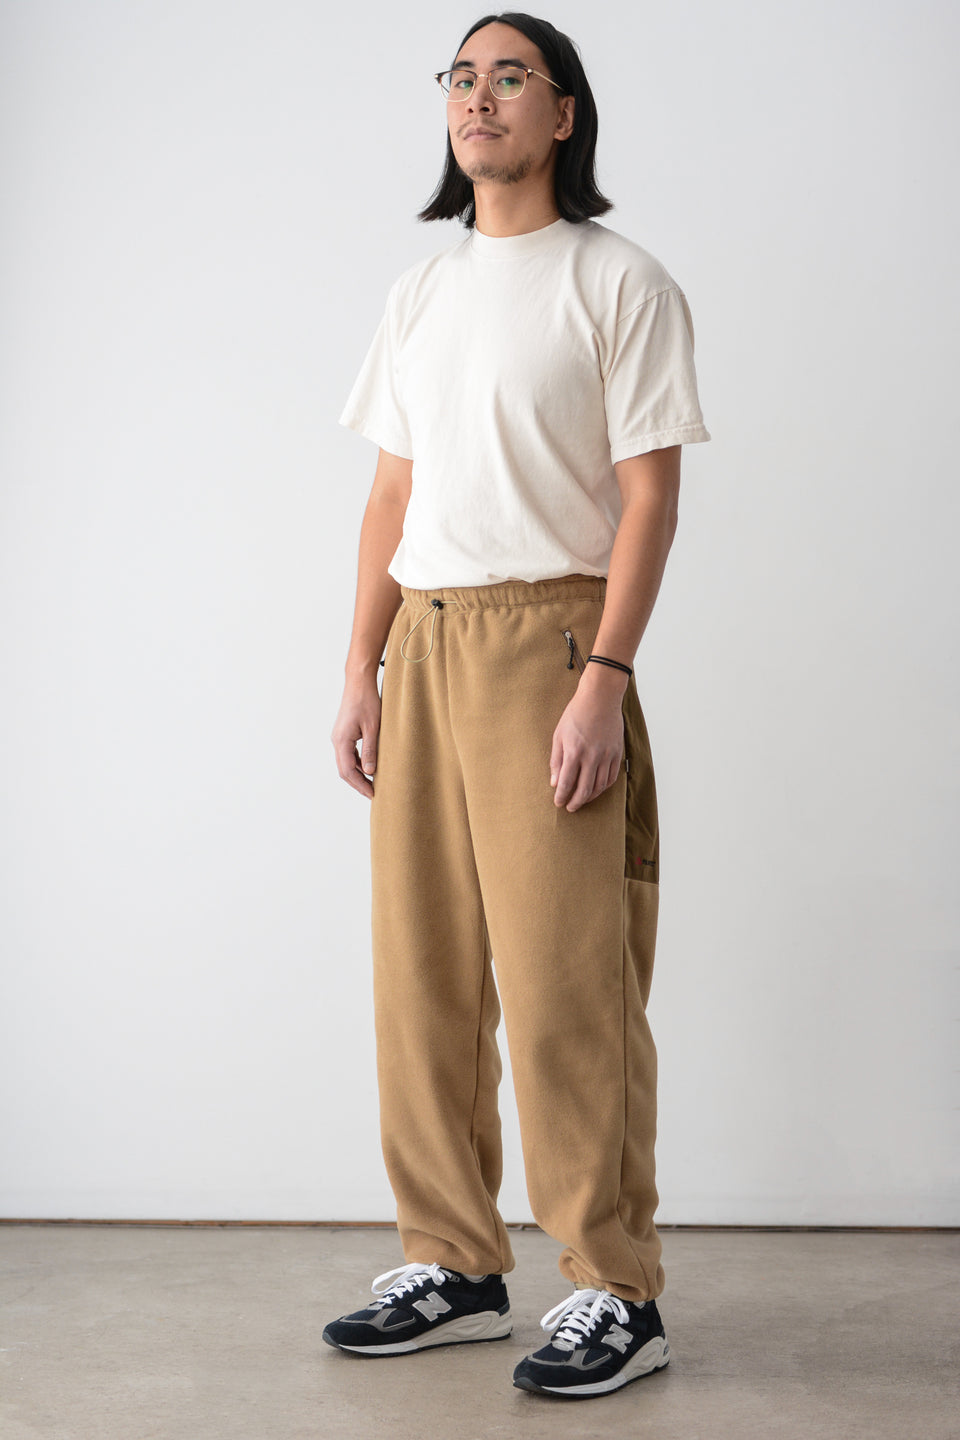 ENDS and MEANS Tactical Fleece Trousers - Brown/Beige